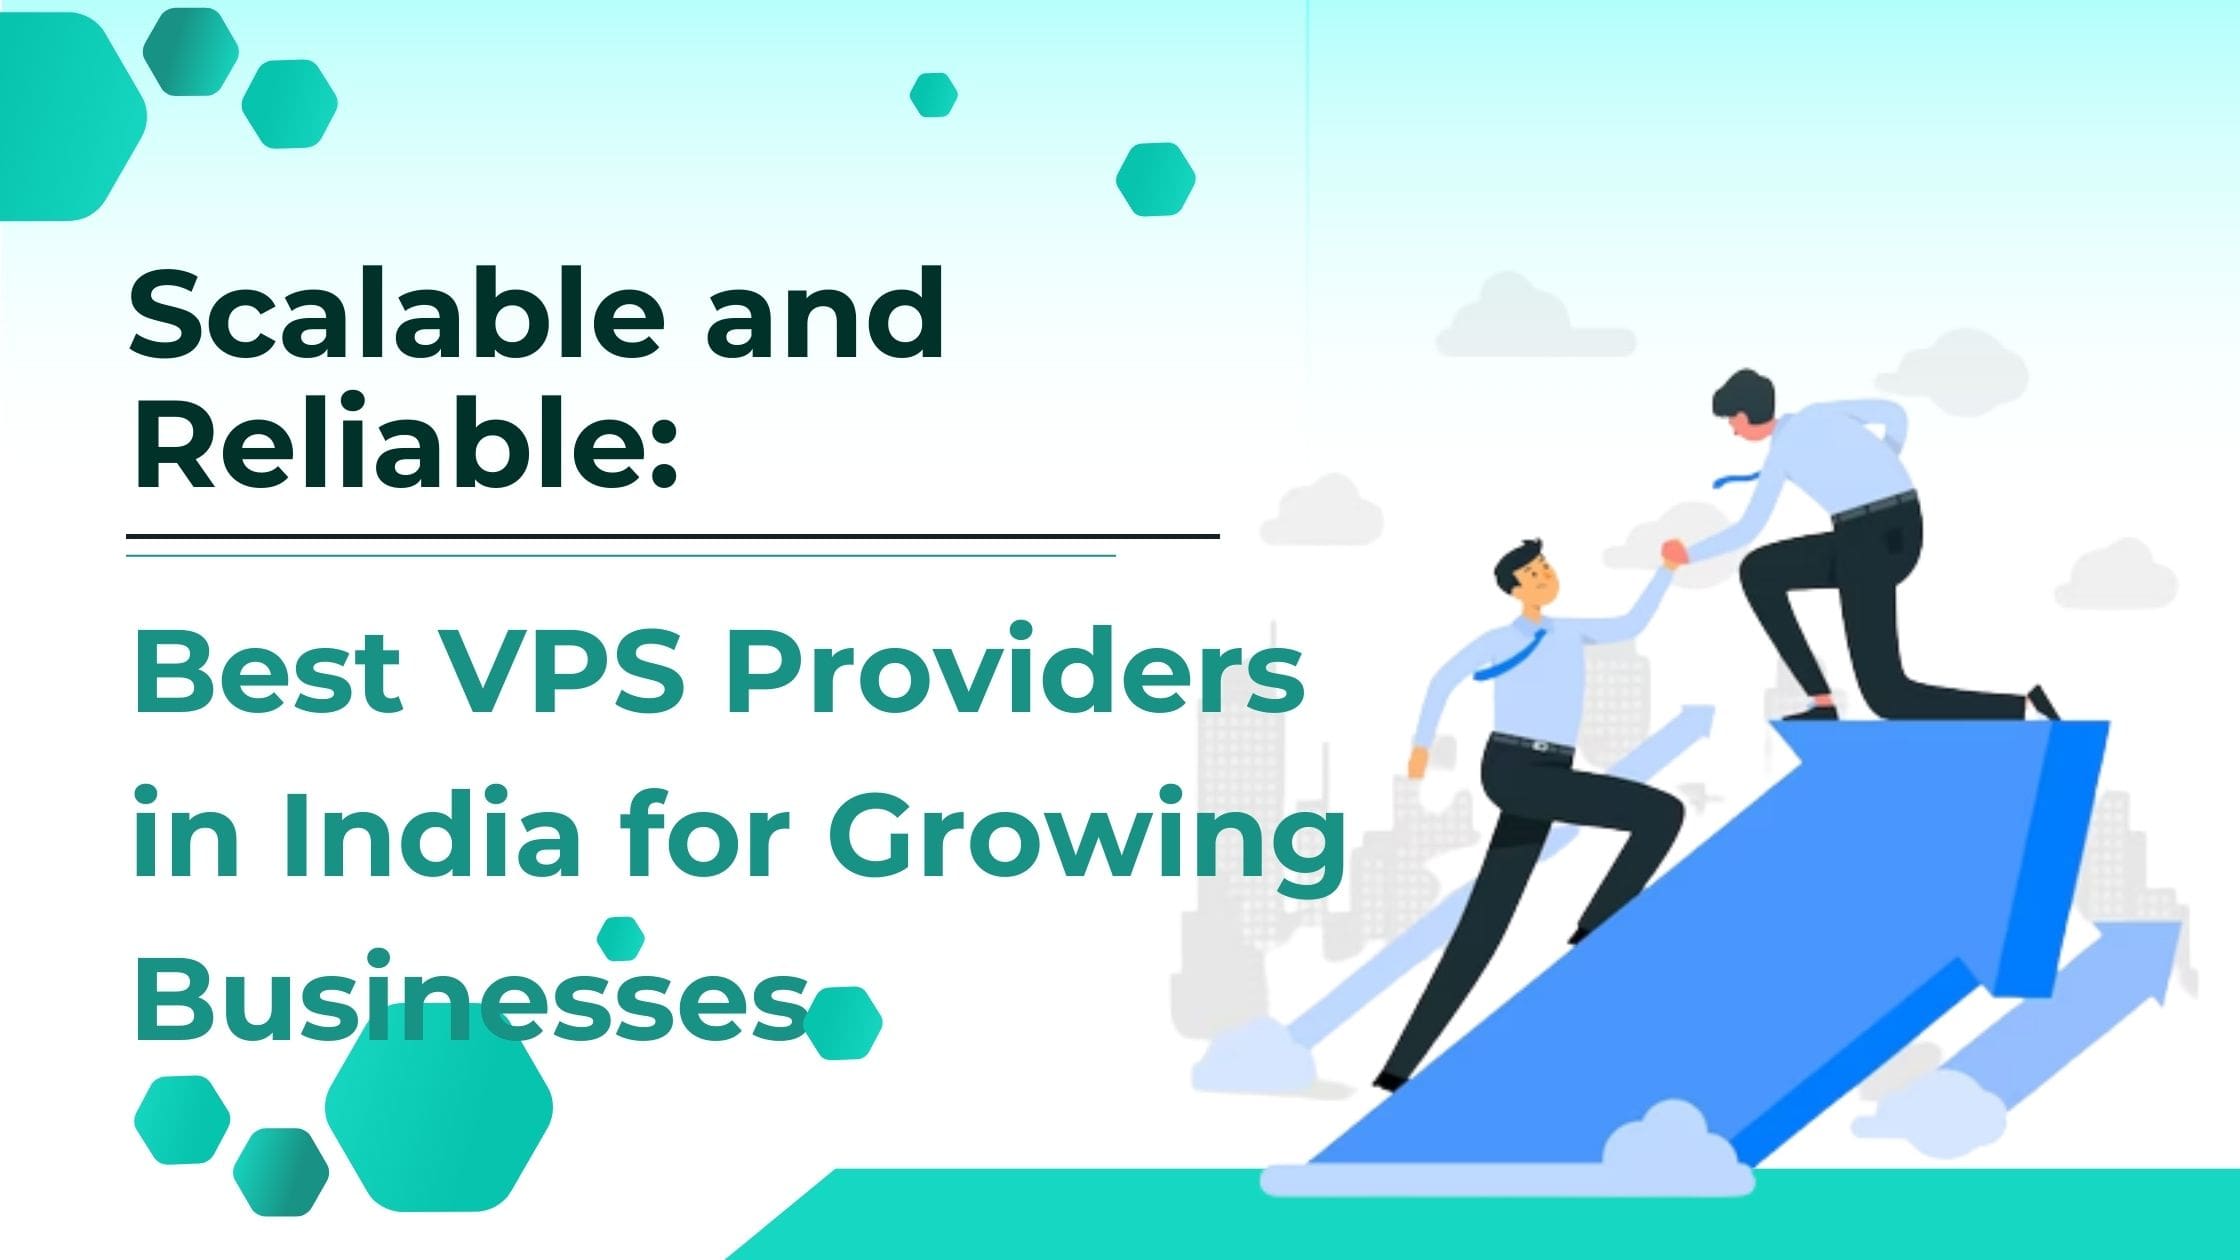 Scalable and Reliable: Best VPS Providers in India for Growing Businesses